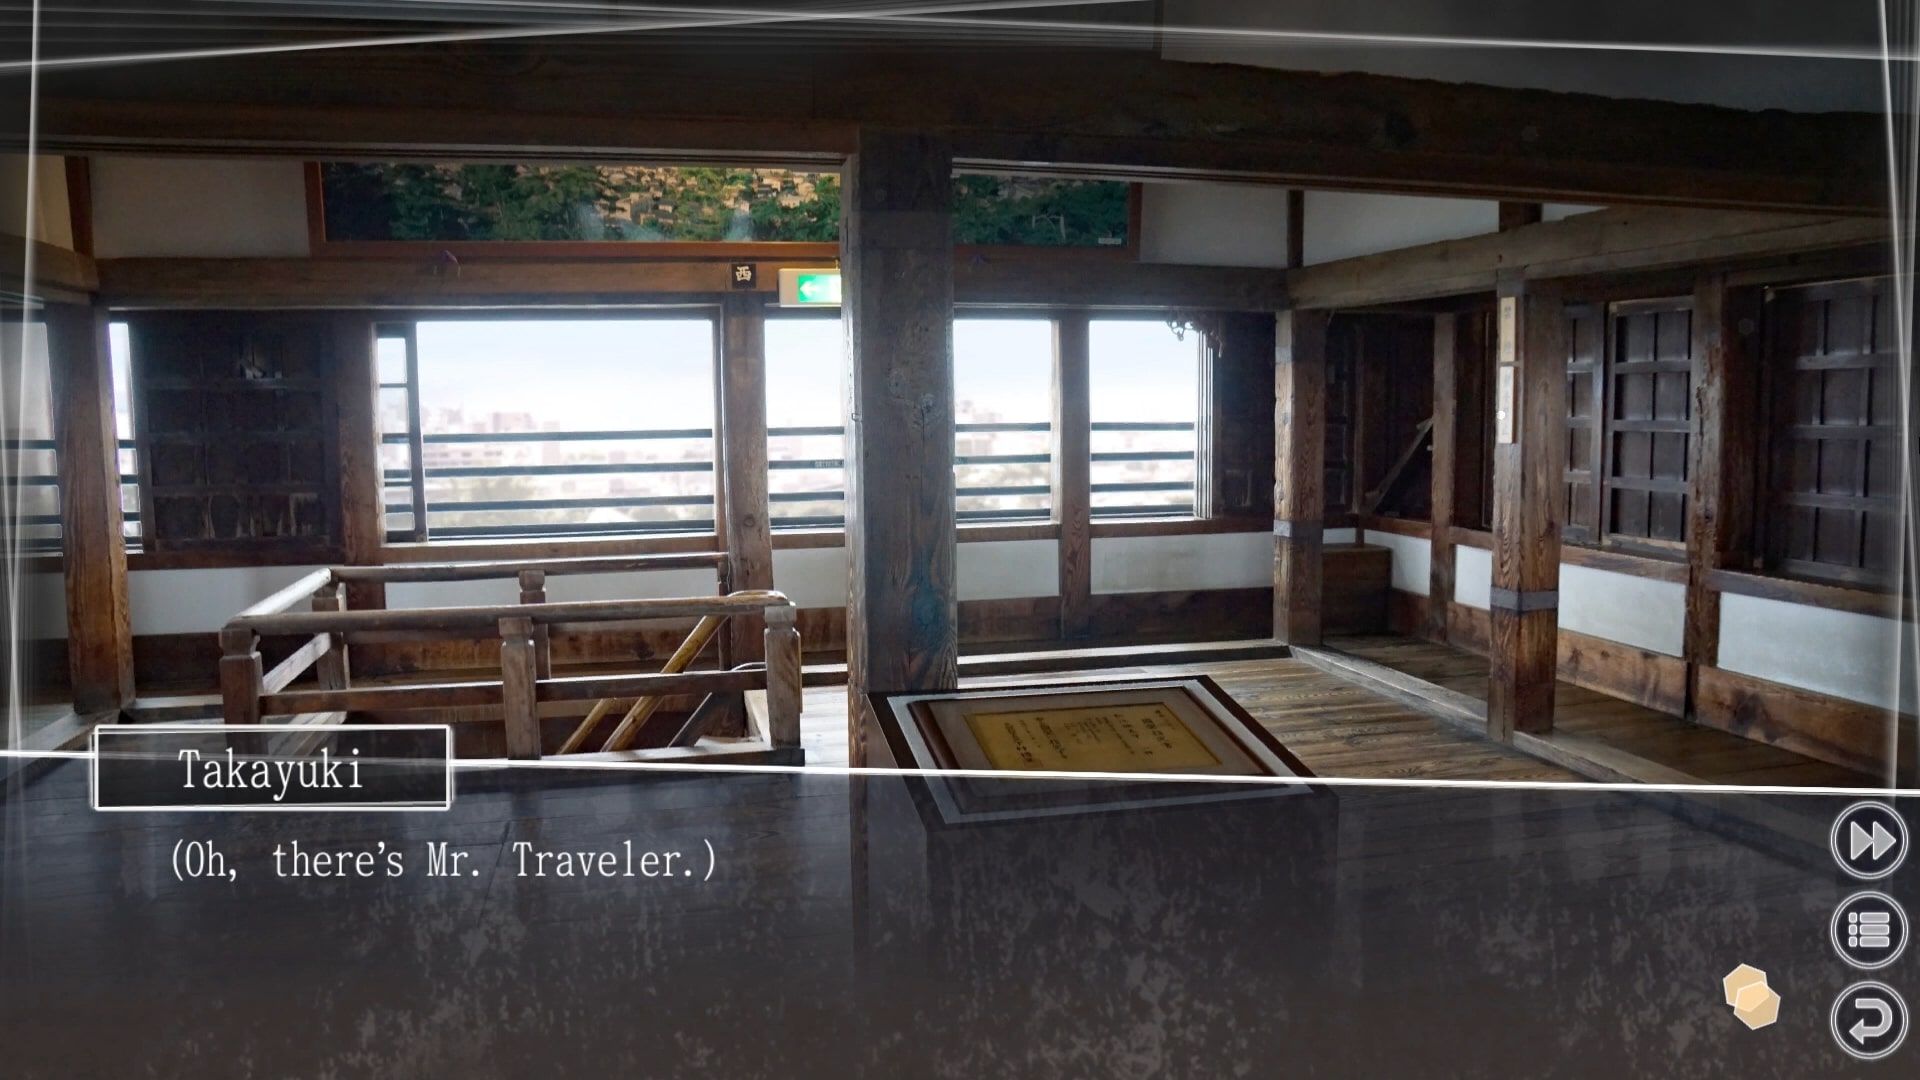 Root Letter Last Answer - Additional Scenarios for Root Letter Last Answer - Scenario 1: Wandering Traveler - 4A74806